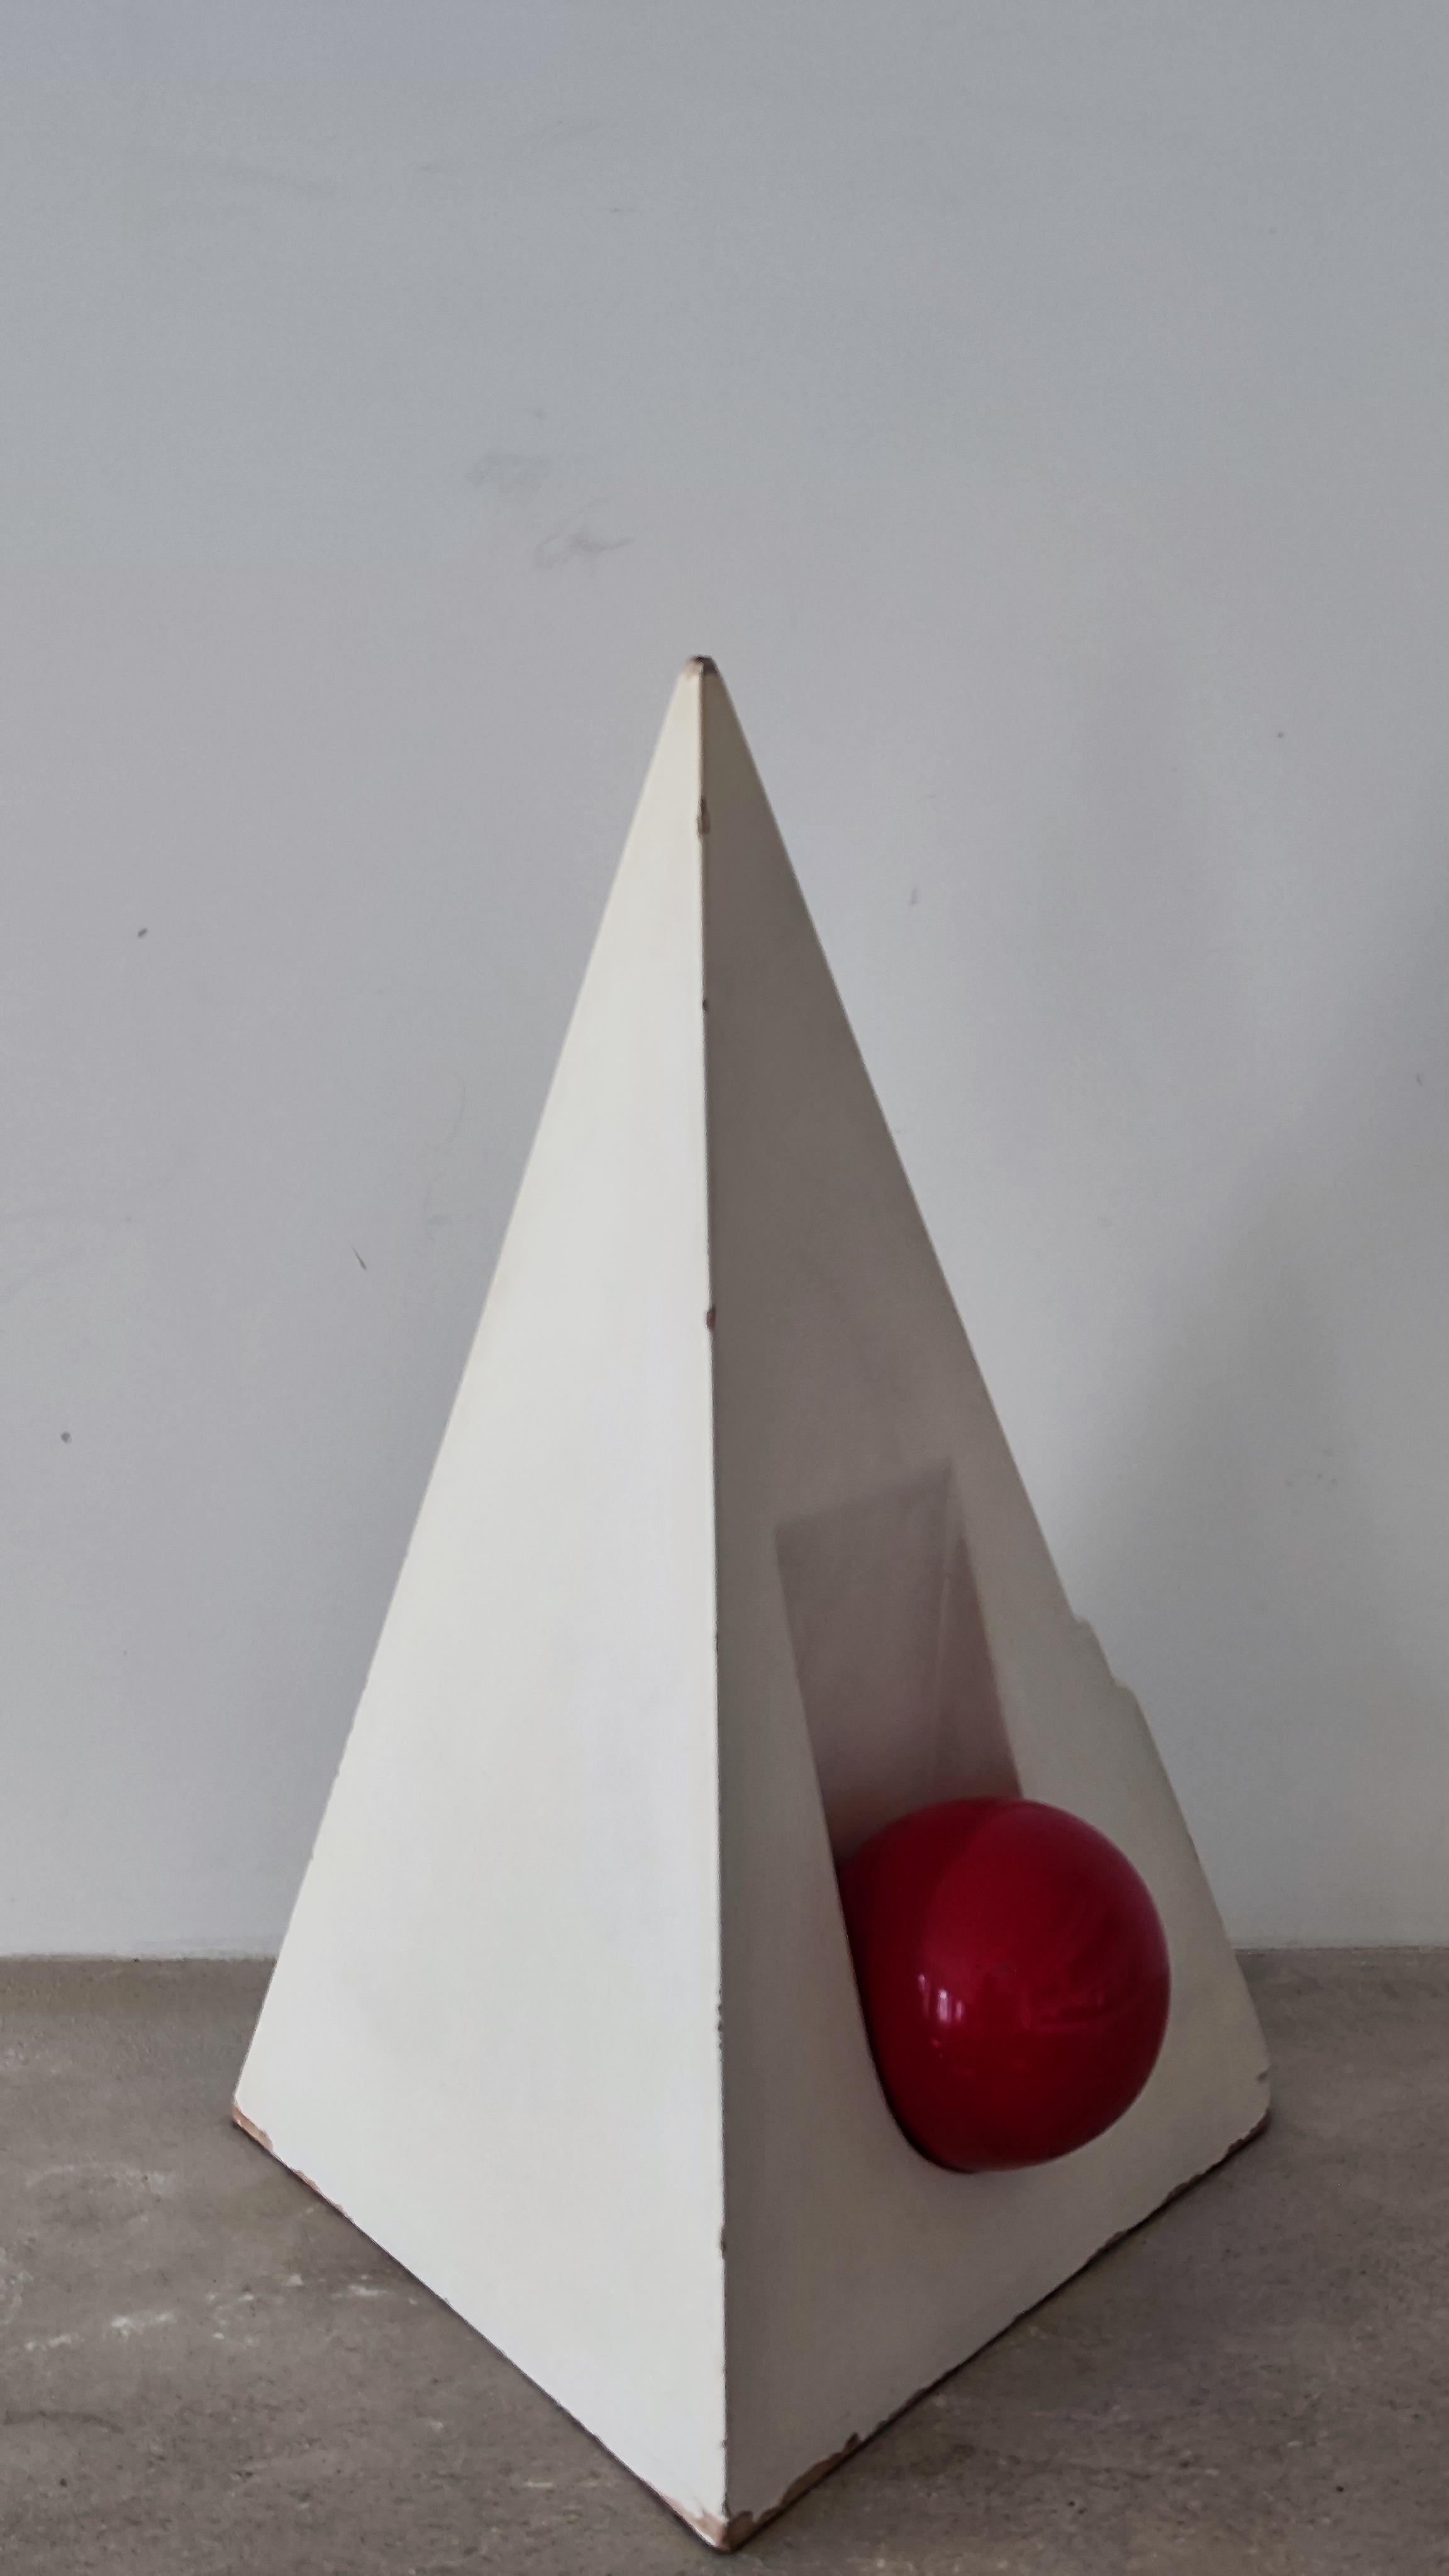 Abstract post modern polychrome pyramid sculpture Memphis 1980, wood - Signed  For Sale 3